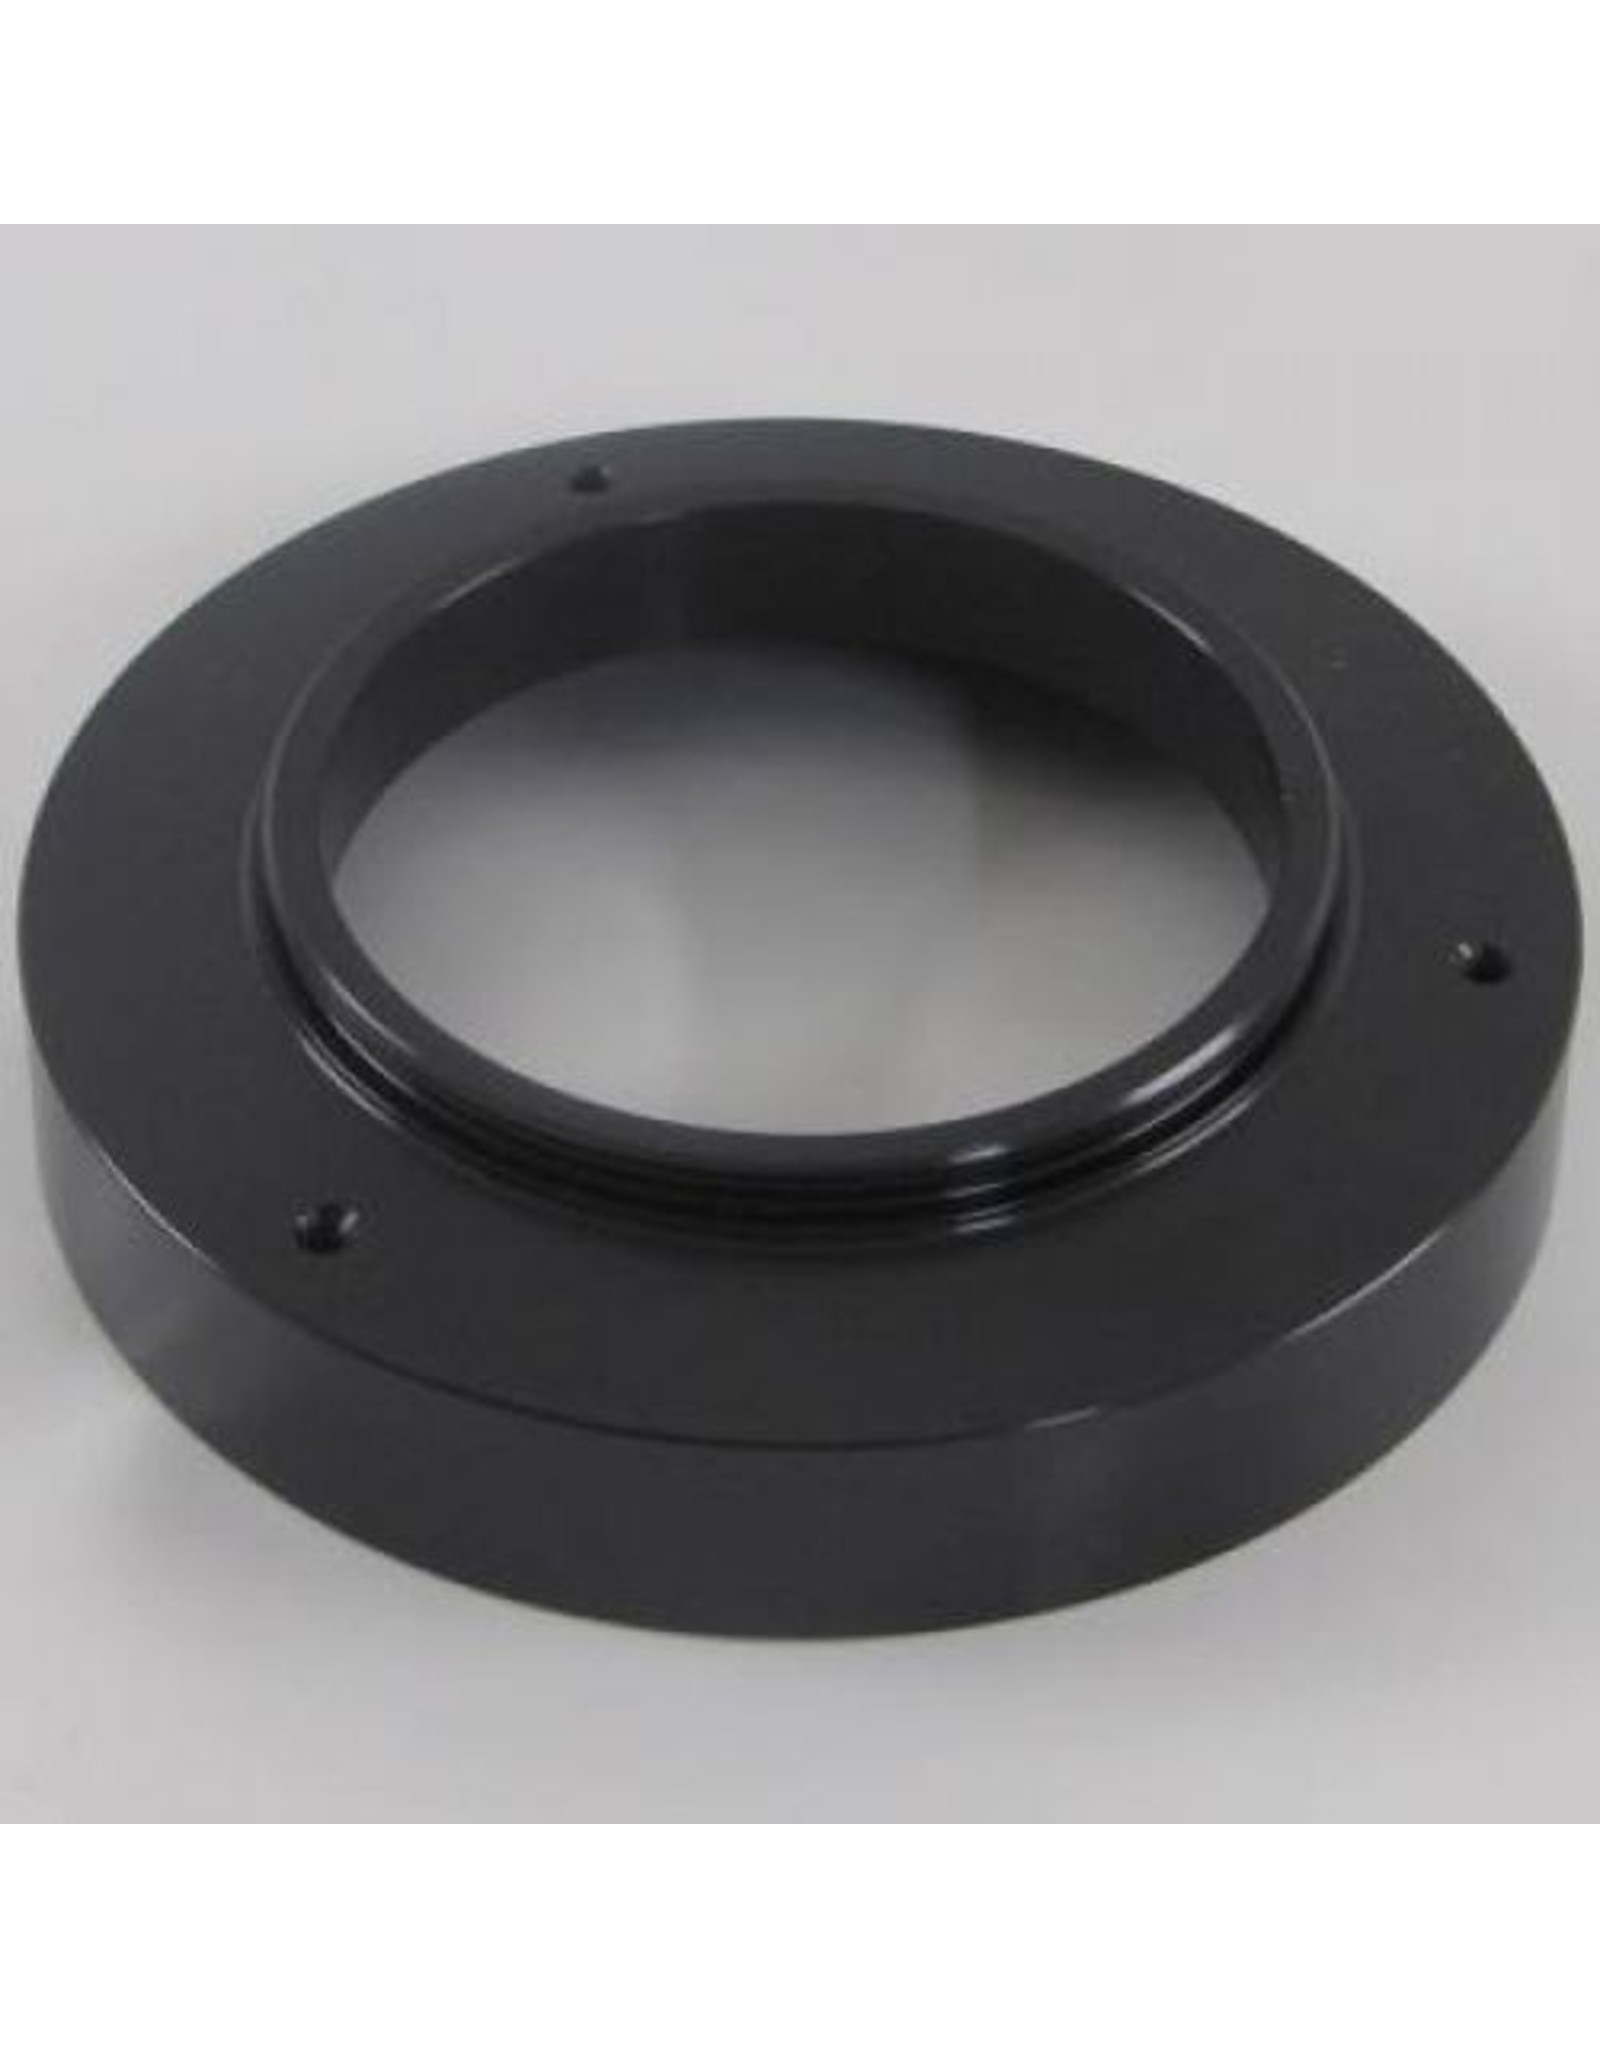 Feathertouch Feather Touch EC35-505-12---End Cap 3.5 for SBIG and FLI 5 series/CCD Camera & Filter Wheels